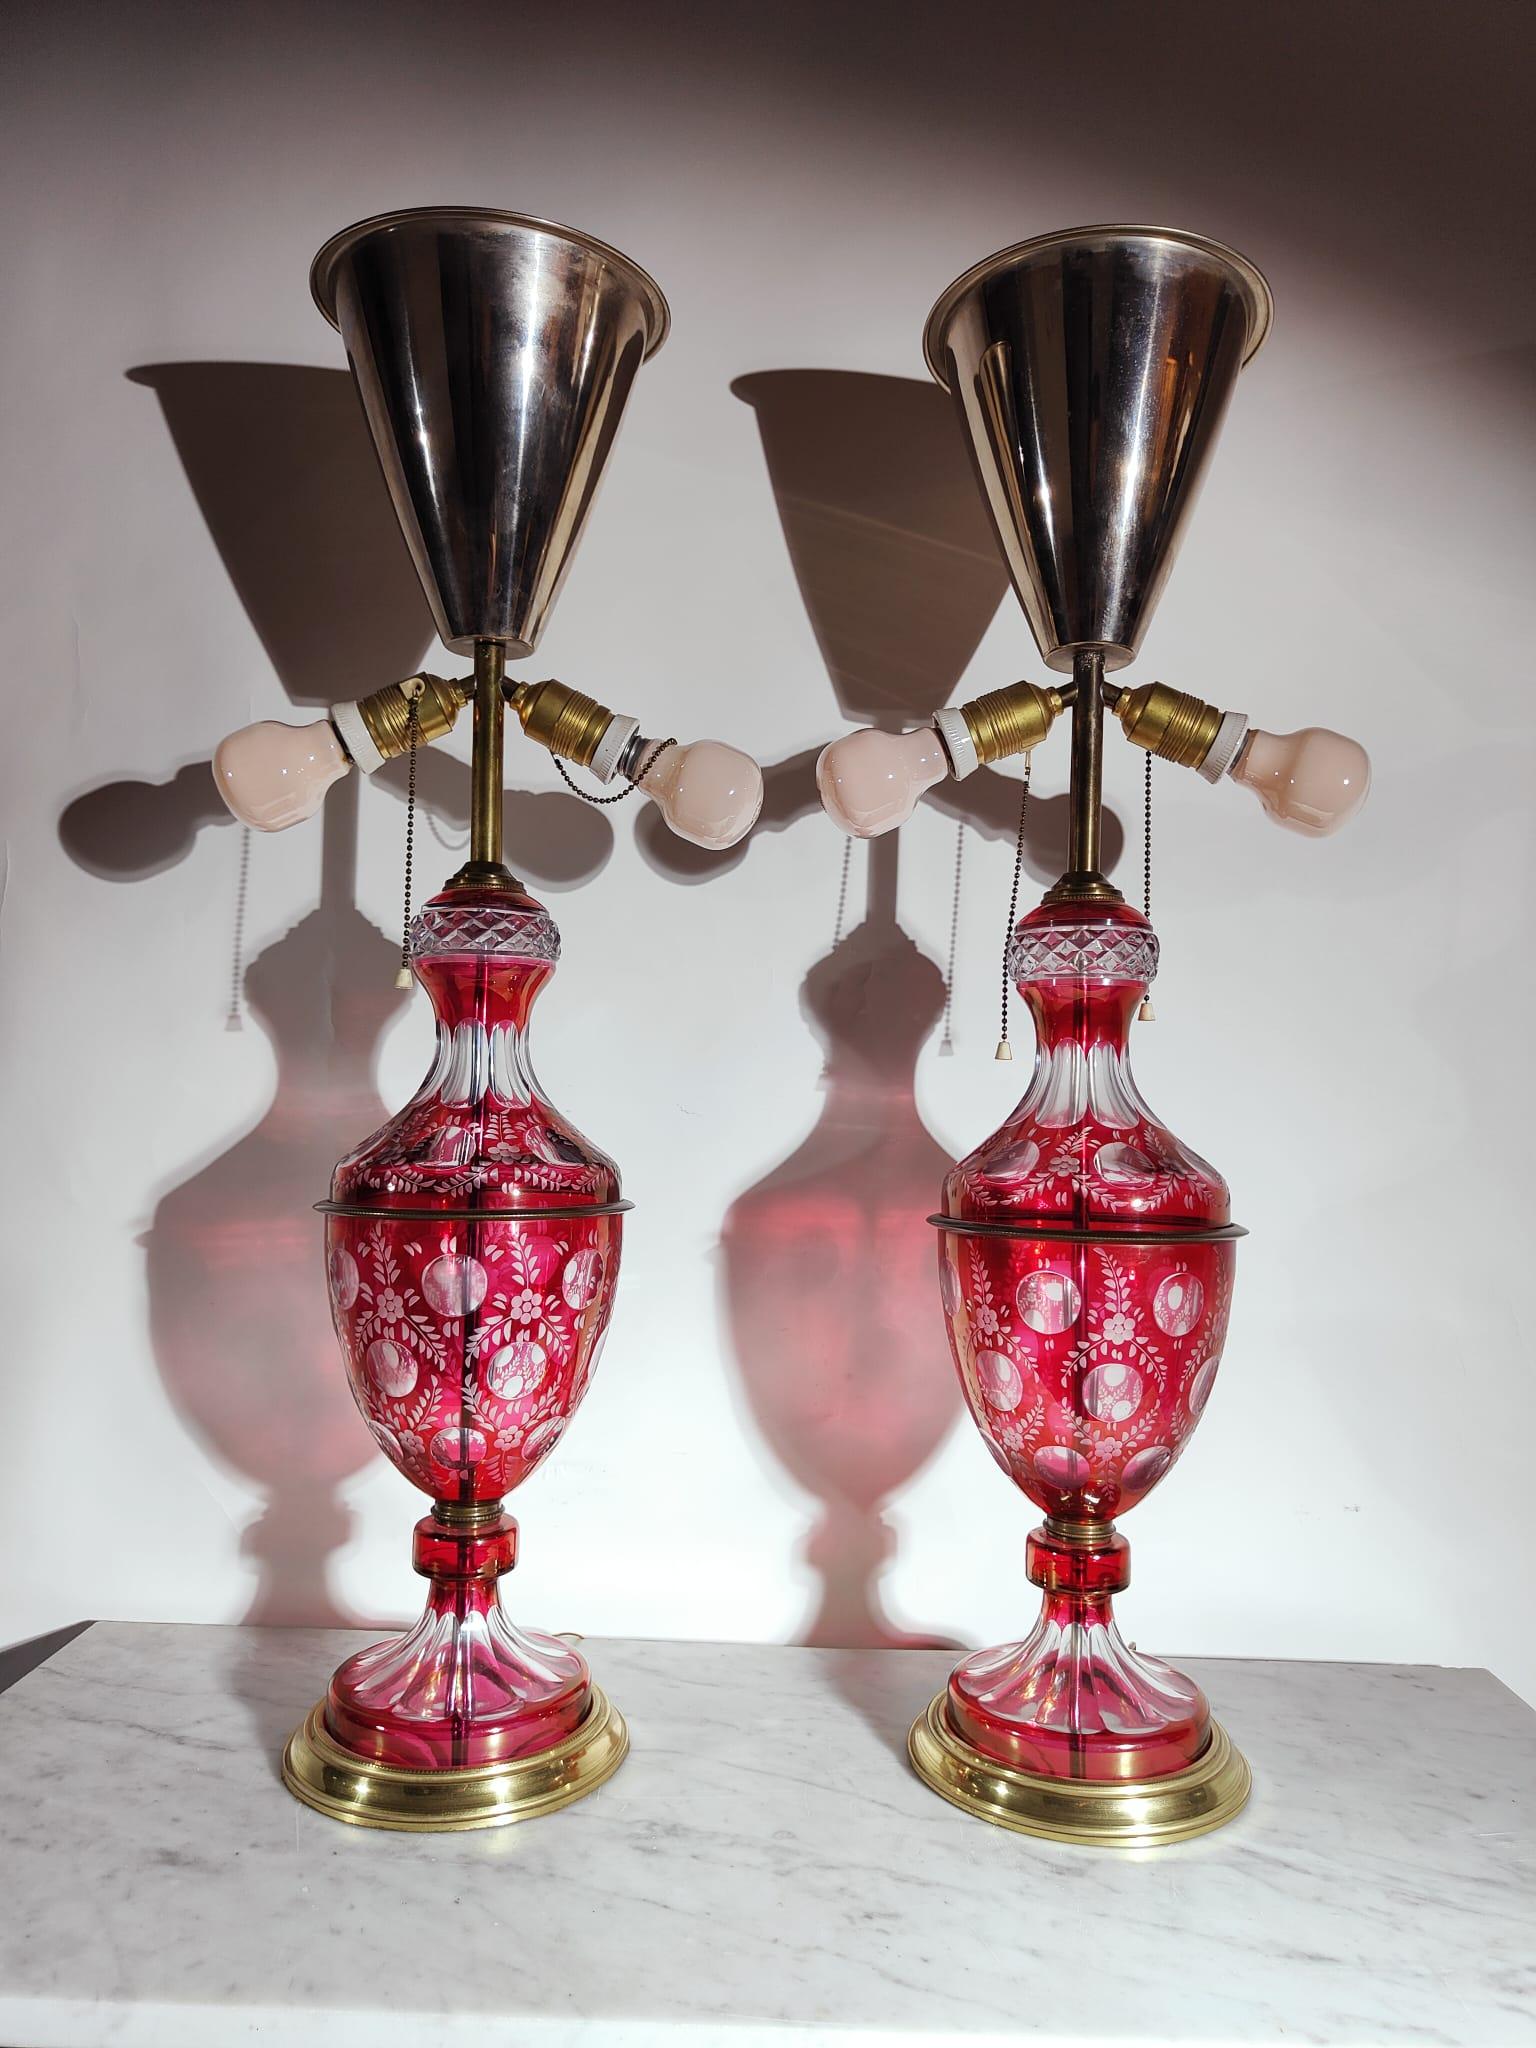 Art Deco Lamps in Cut Glass from 1900, 20th Century For Sale